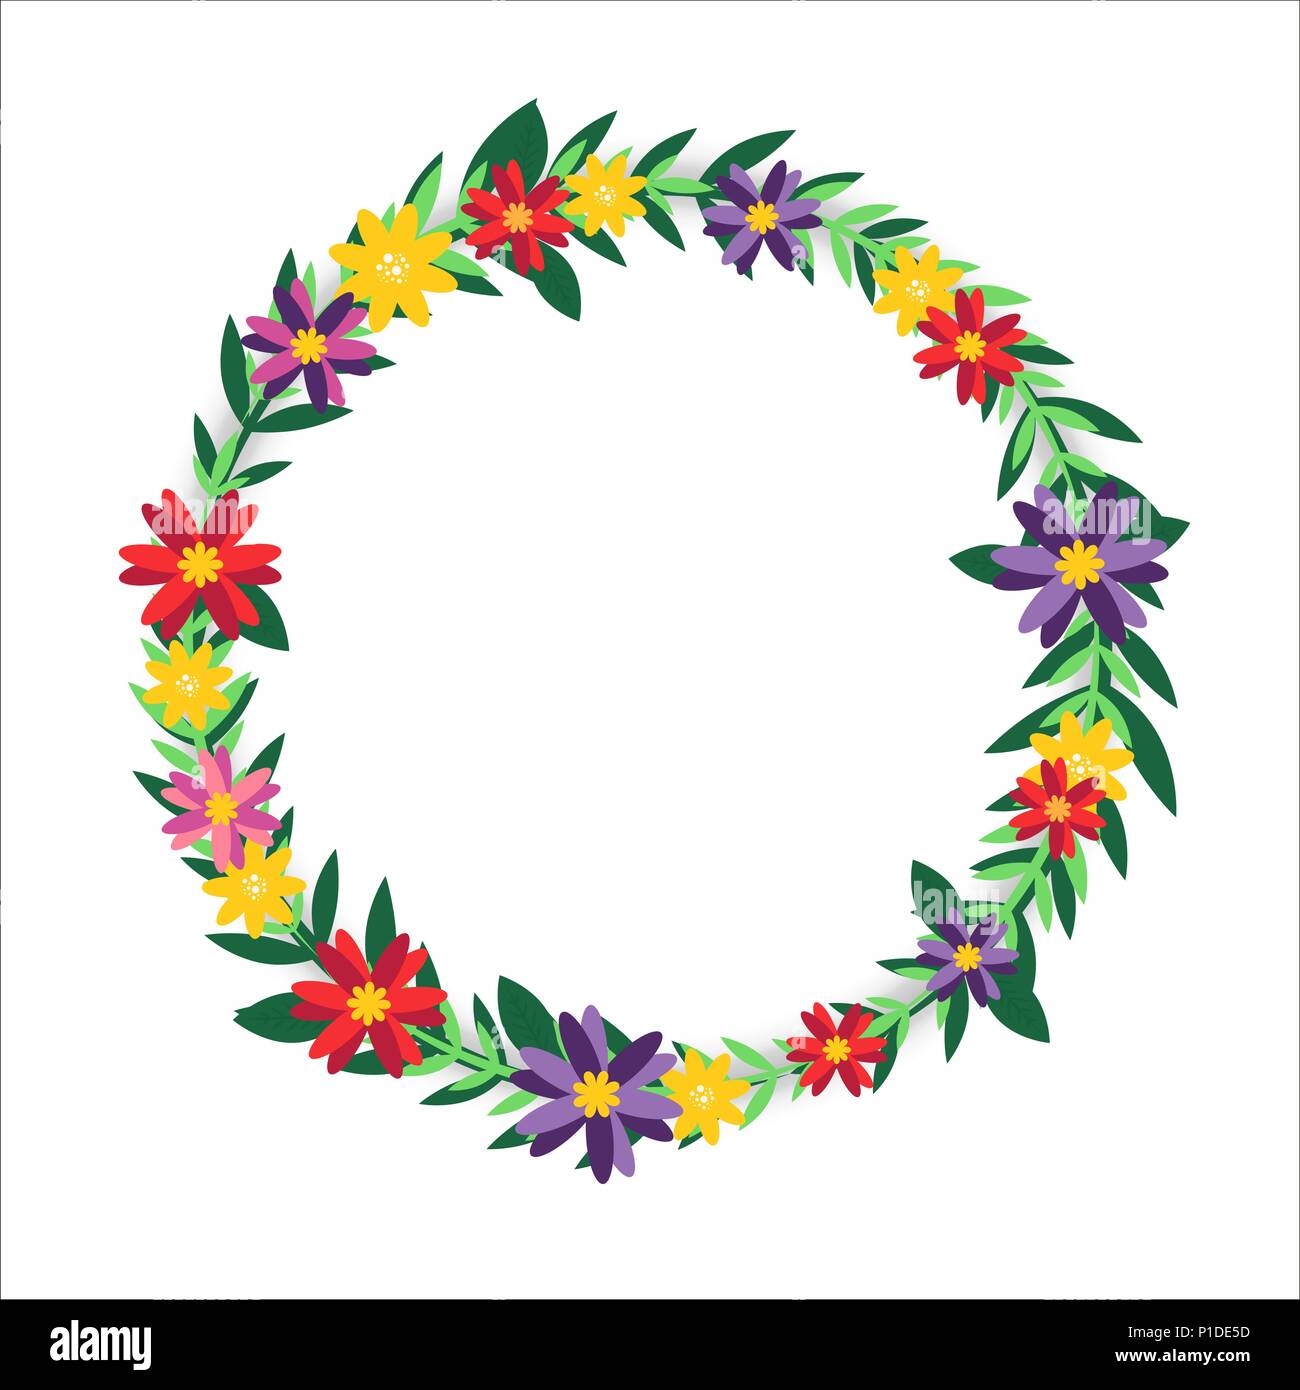 Flower wreath illustration on isolated background. Hand drawn daisy floral frame with copy space for text. EPS10 vector. Stock Vector